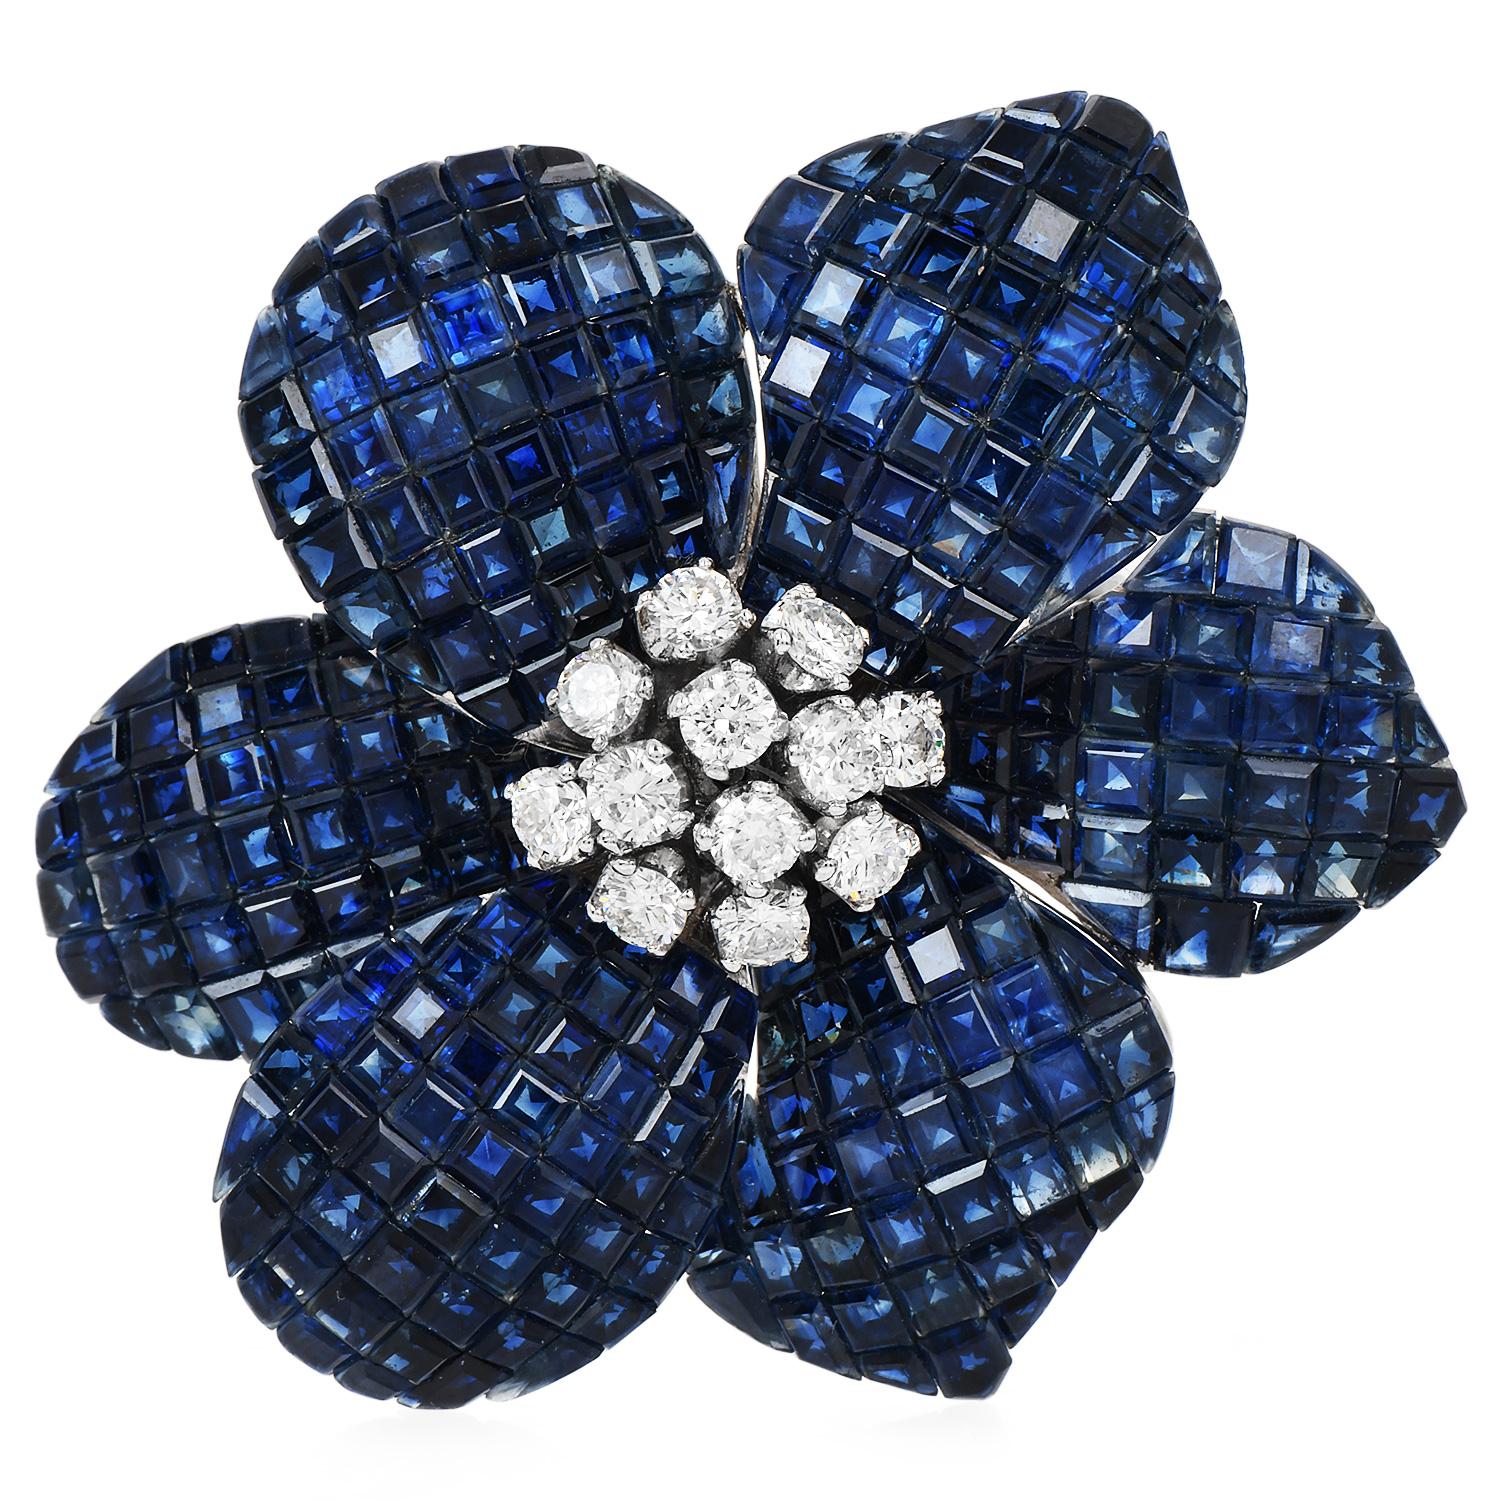 The Vintage Diamond Blue Sapphire 18K White Gold Flower Brooch, is the perfect enhancement for a scarf or blouse.

Crafted in 18K white gold, has a timeless appeal, and a lustrous shine.

The focal point of this piece is the captivating combination